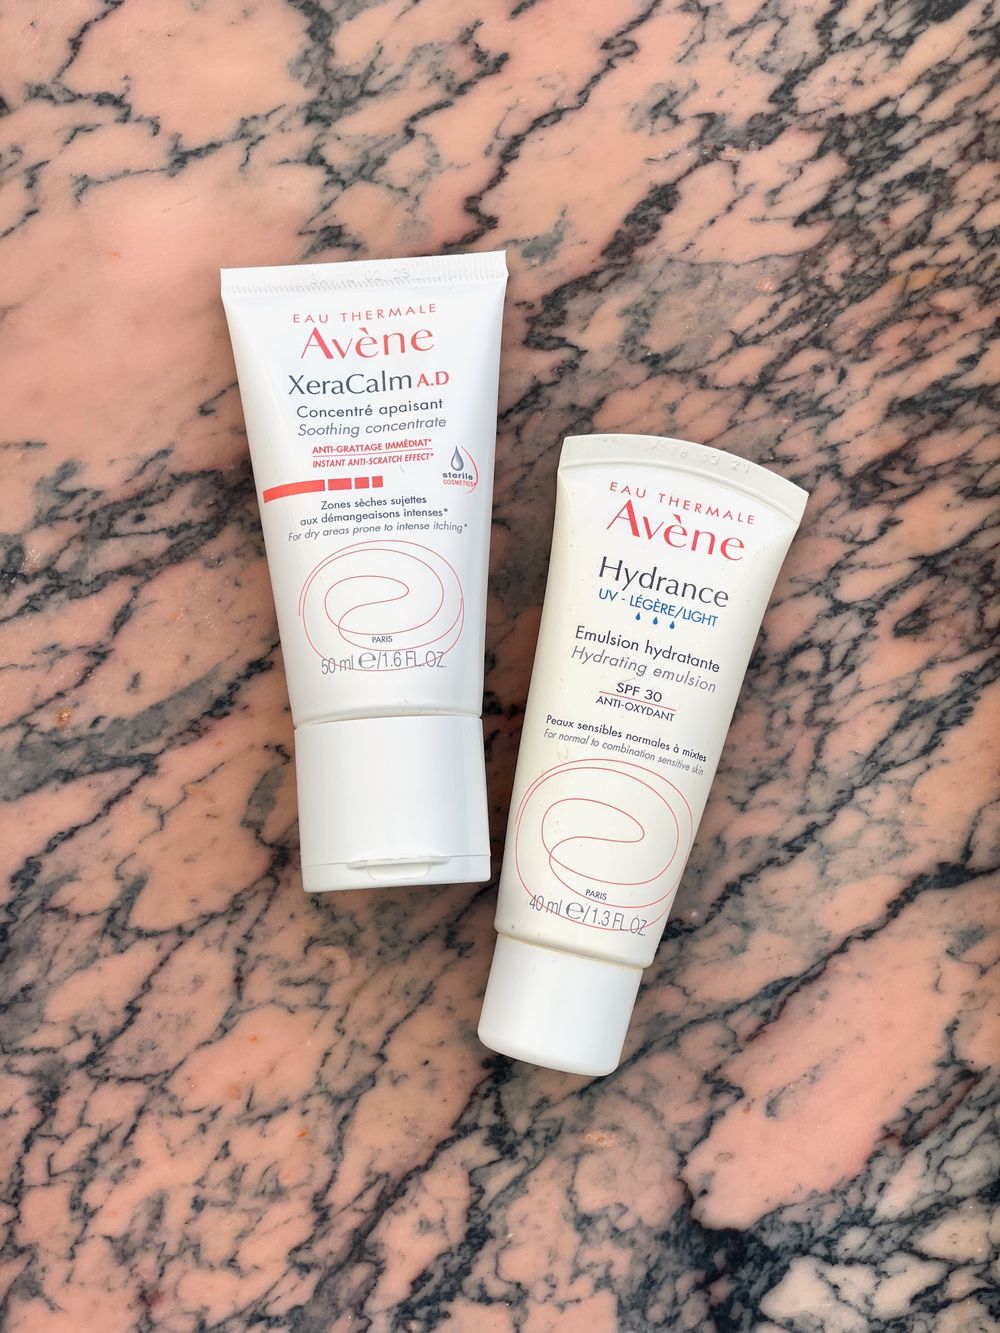 7 Best Avène Moisturizers for Your Skin Type